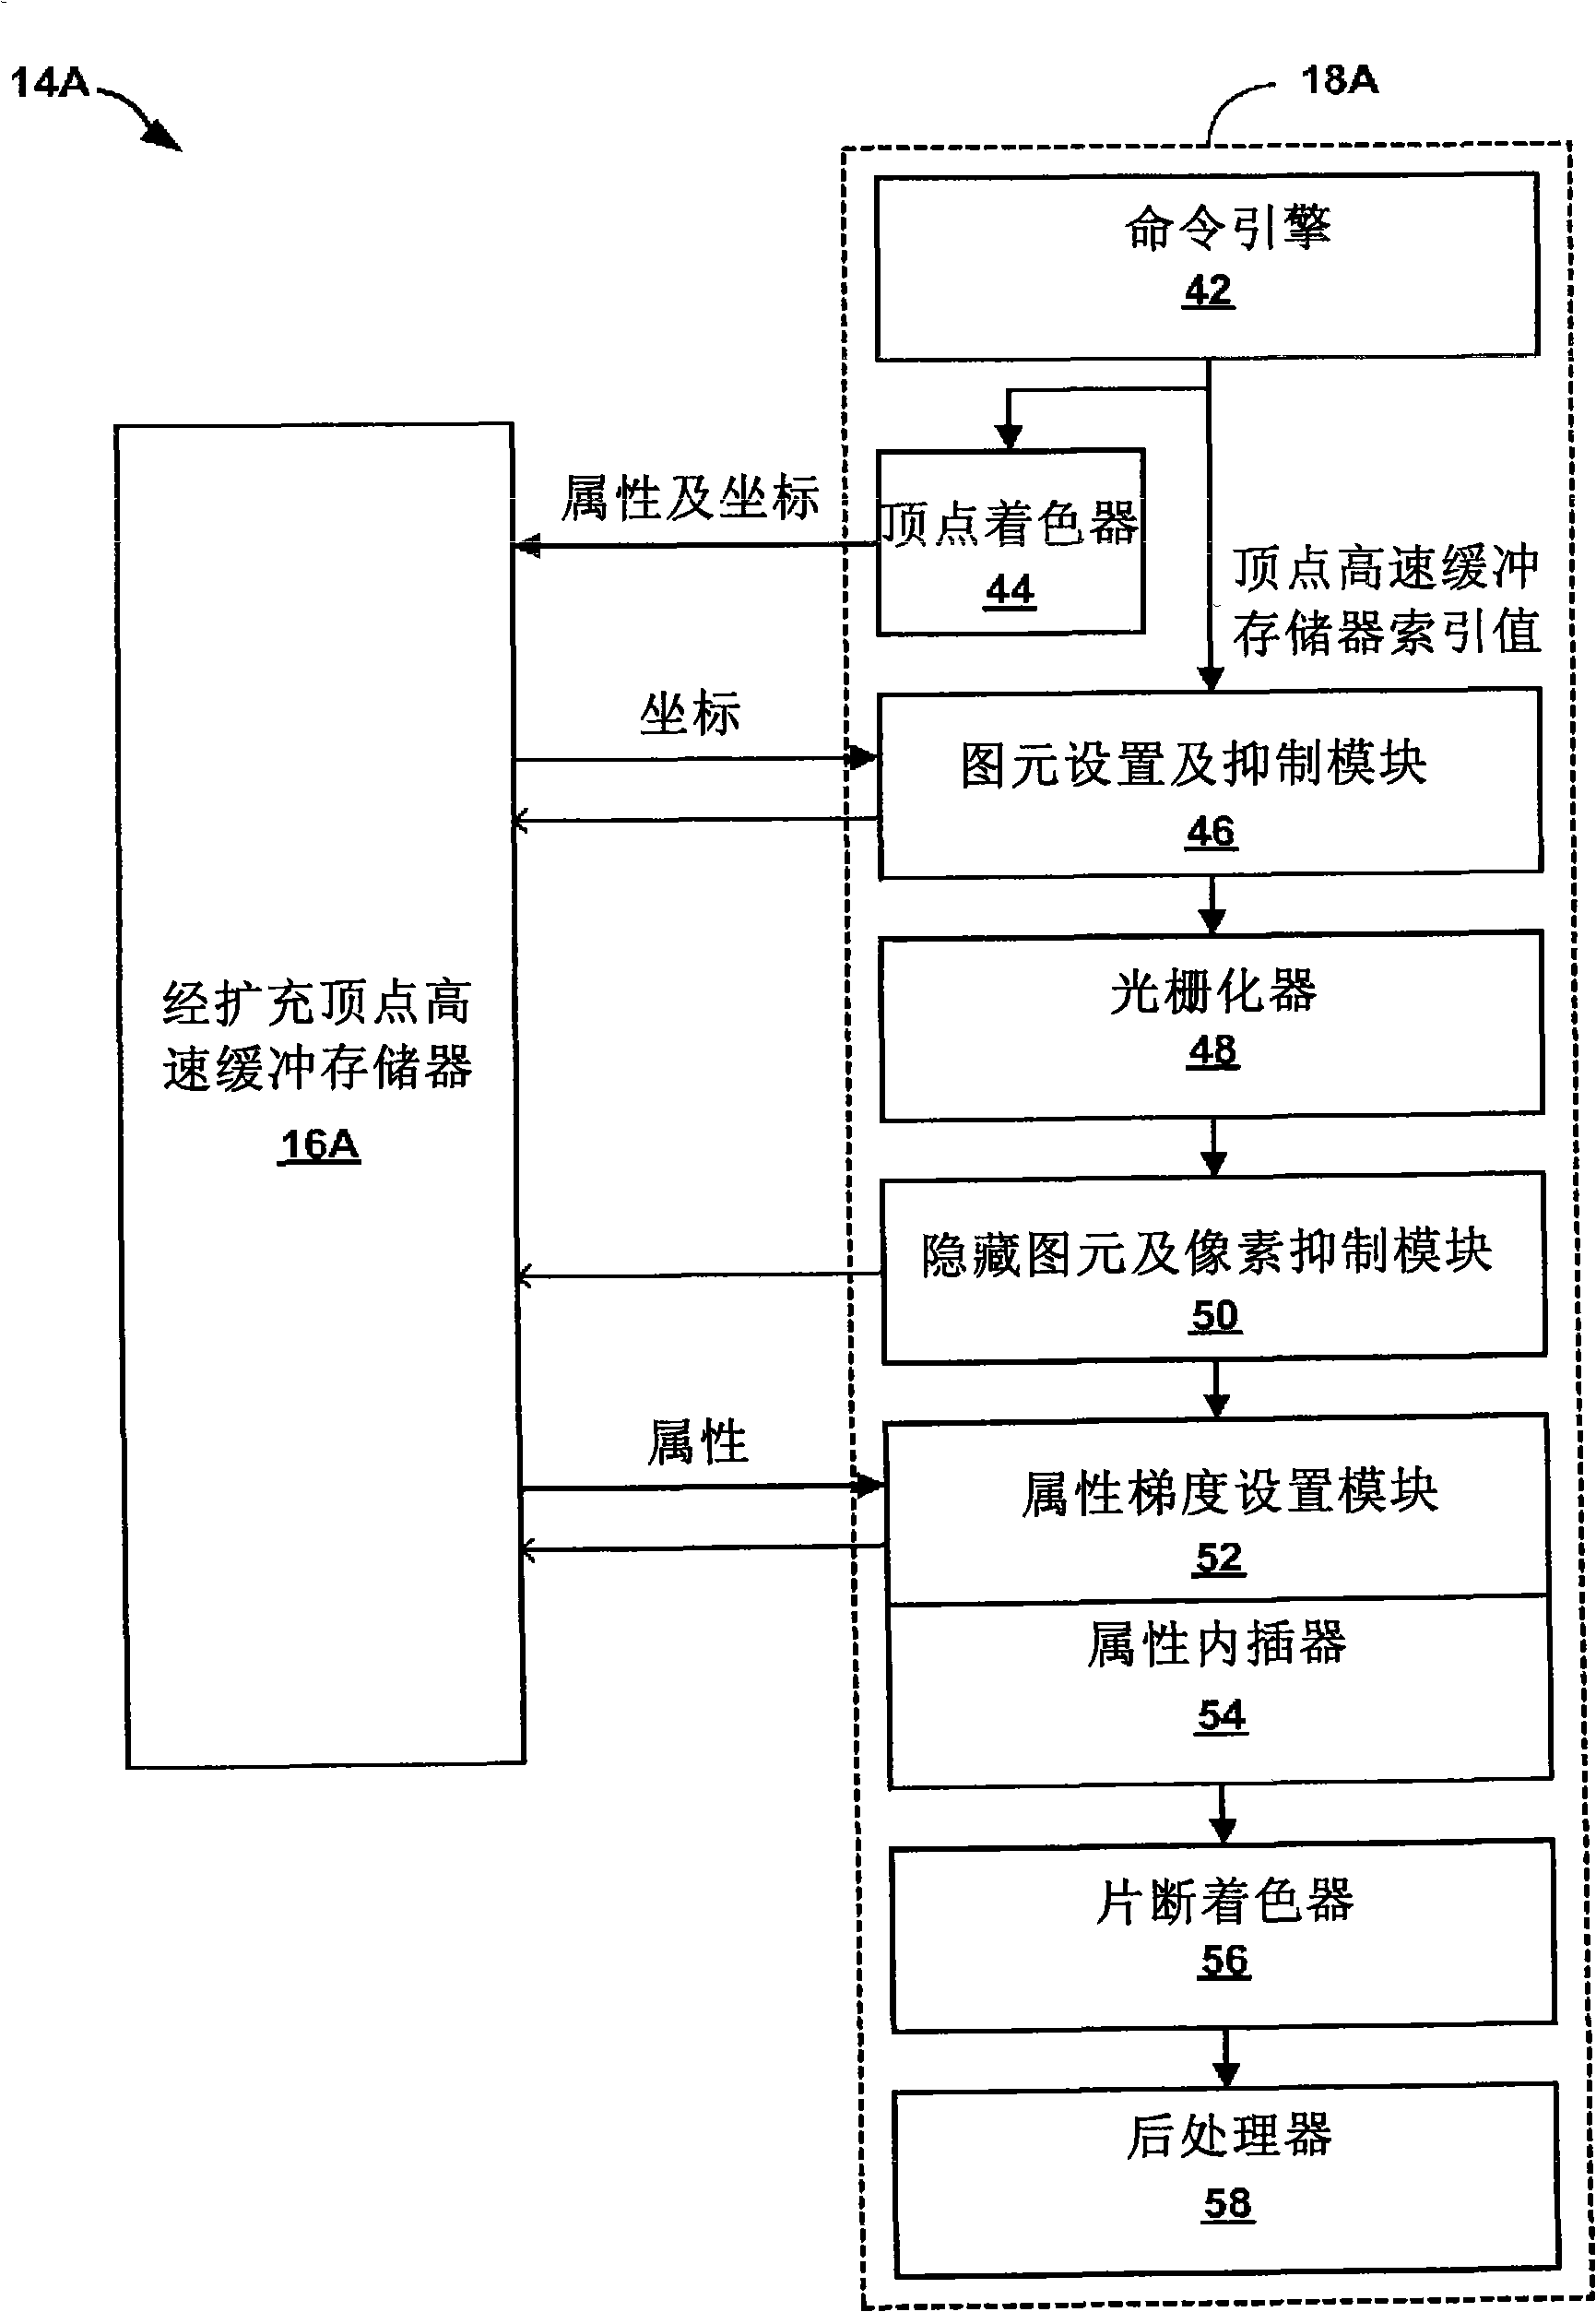 Graphics processing unit with extended vertex cache